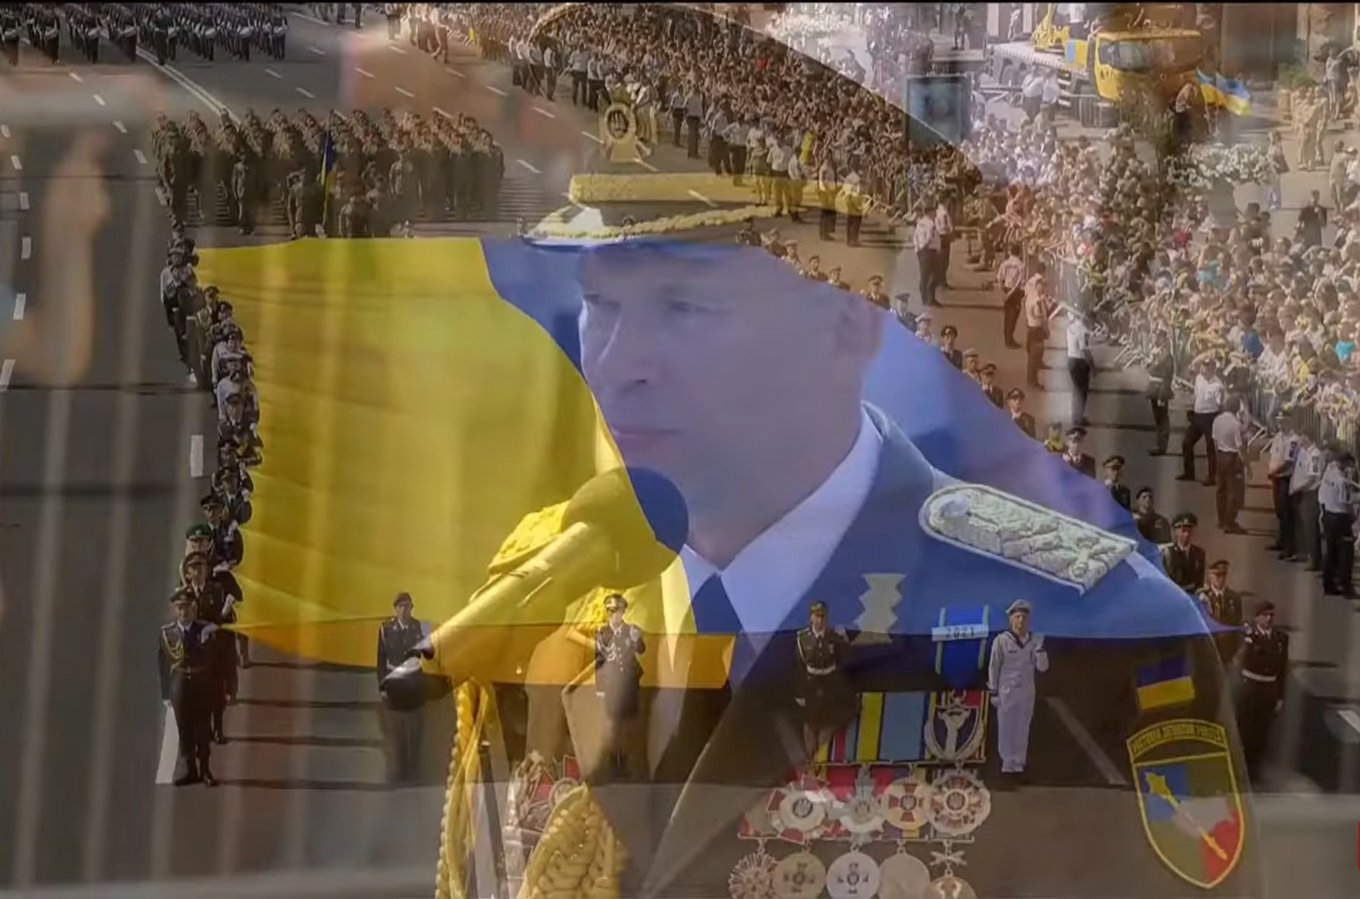 Colonel-General Oleksandr Syrsky commanded of the Kyiv Independence Day Parade in 2021 in a honor of the 30th anniversary of Ukrainian Independence, Commander of Ukraine’s Ground Forces Celebrates His Birthday, the Day Before He Visited Troops Fighting on the Bakhmut and Lyman Directions, Defense Express